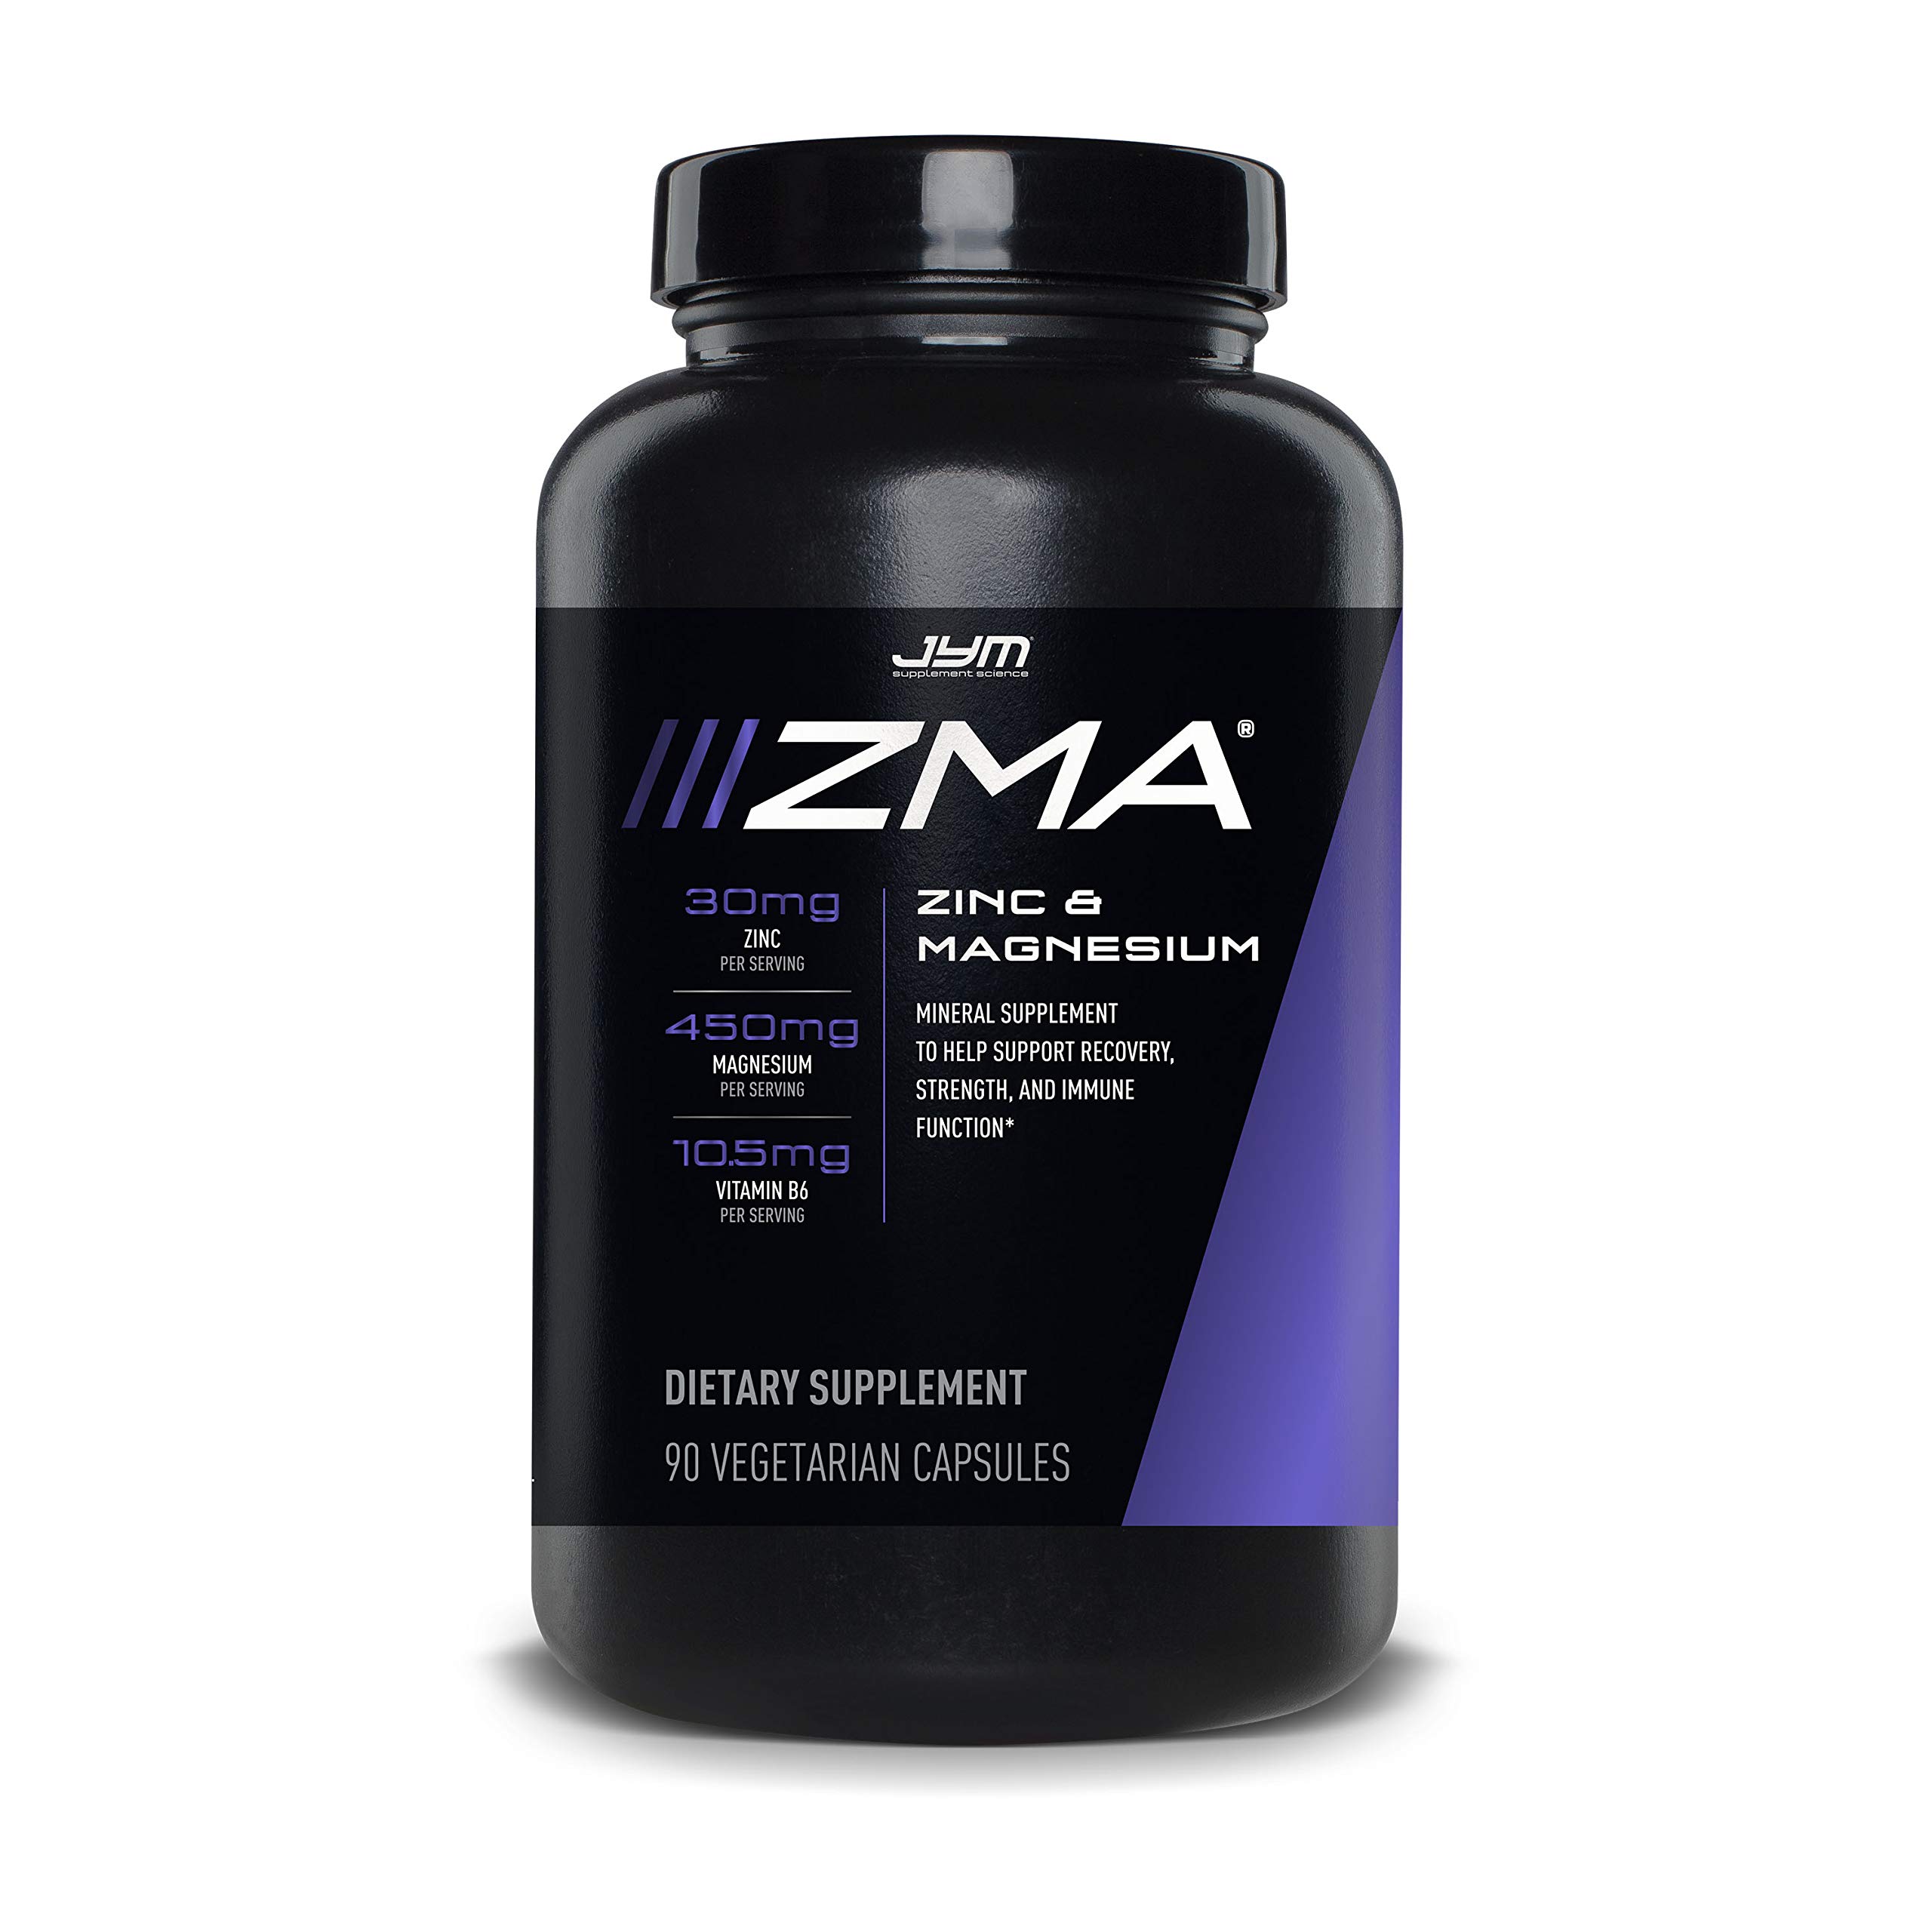 Omega JYM Fish Oil 2800mg, 120 Soft Gels & itamin, 60 Tablets & ZMA Zinc/Magnesium Capsules Supplement, 90